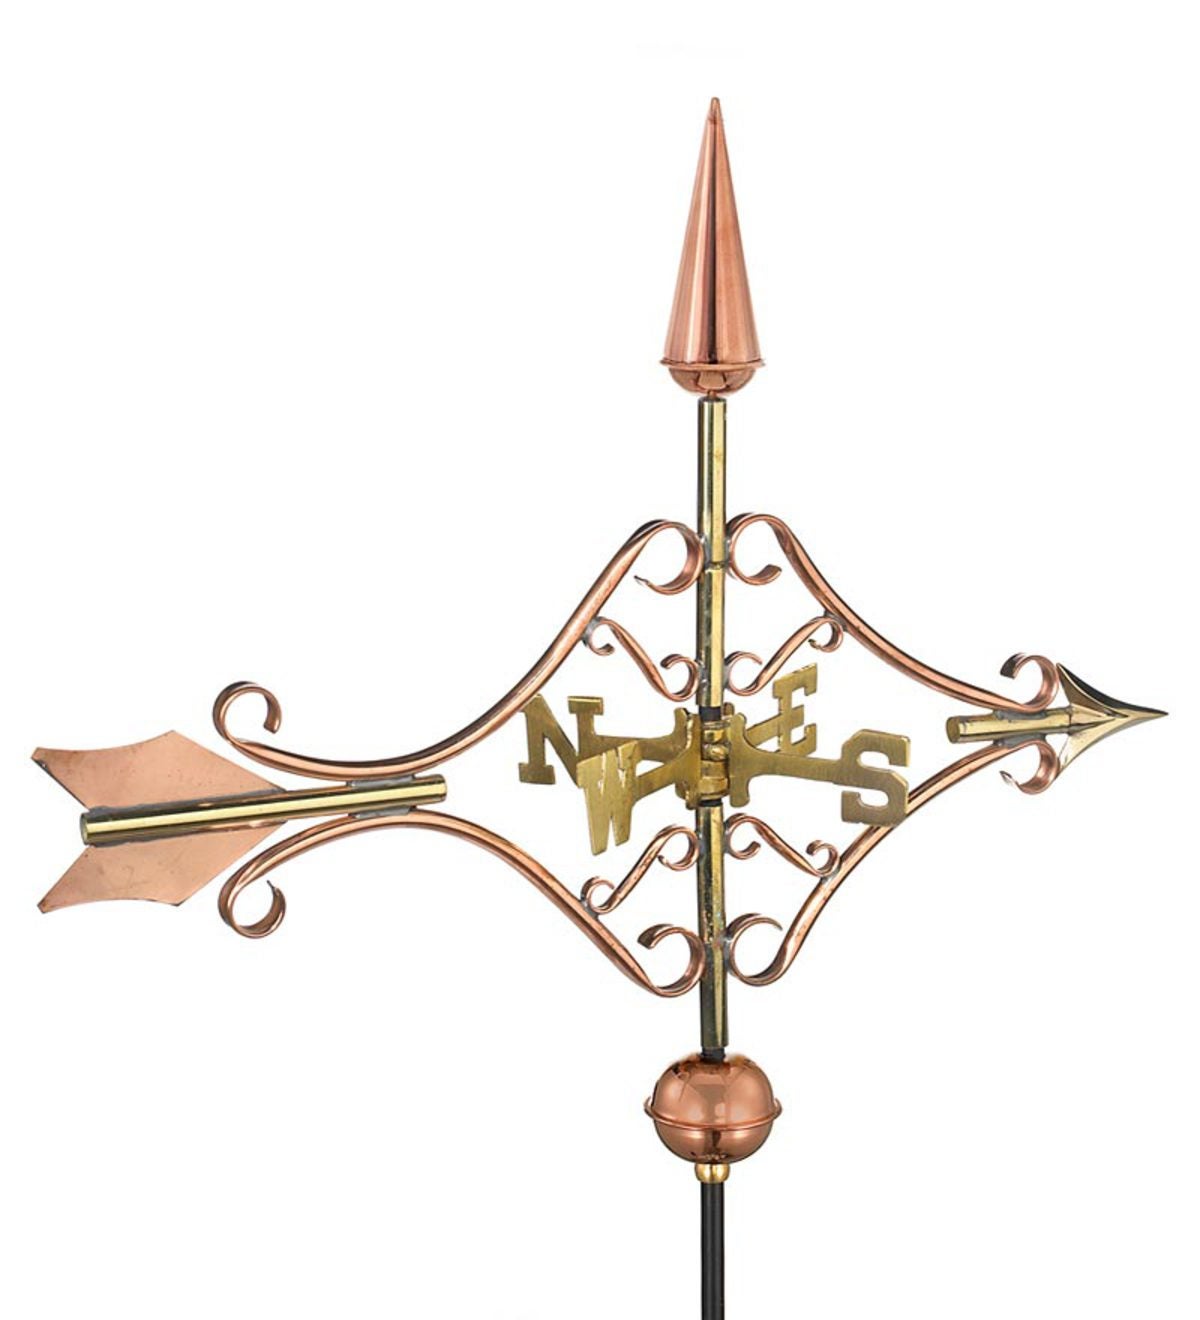 Handcrafted Victorian Arrow Garden Weathervane With Pole In Polished Copper